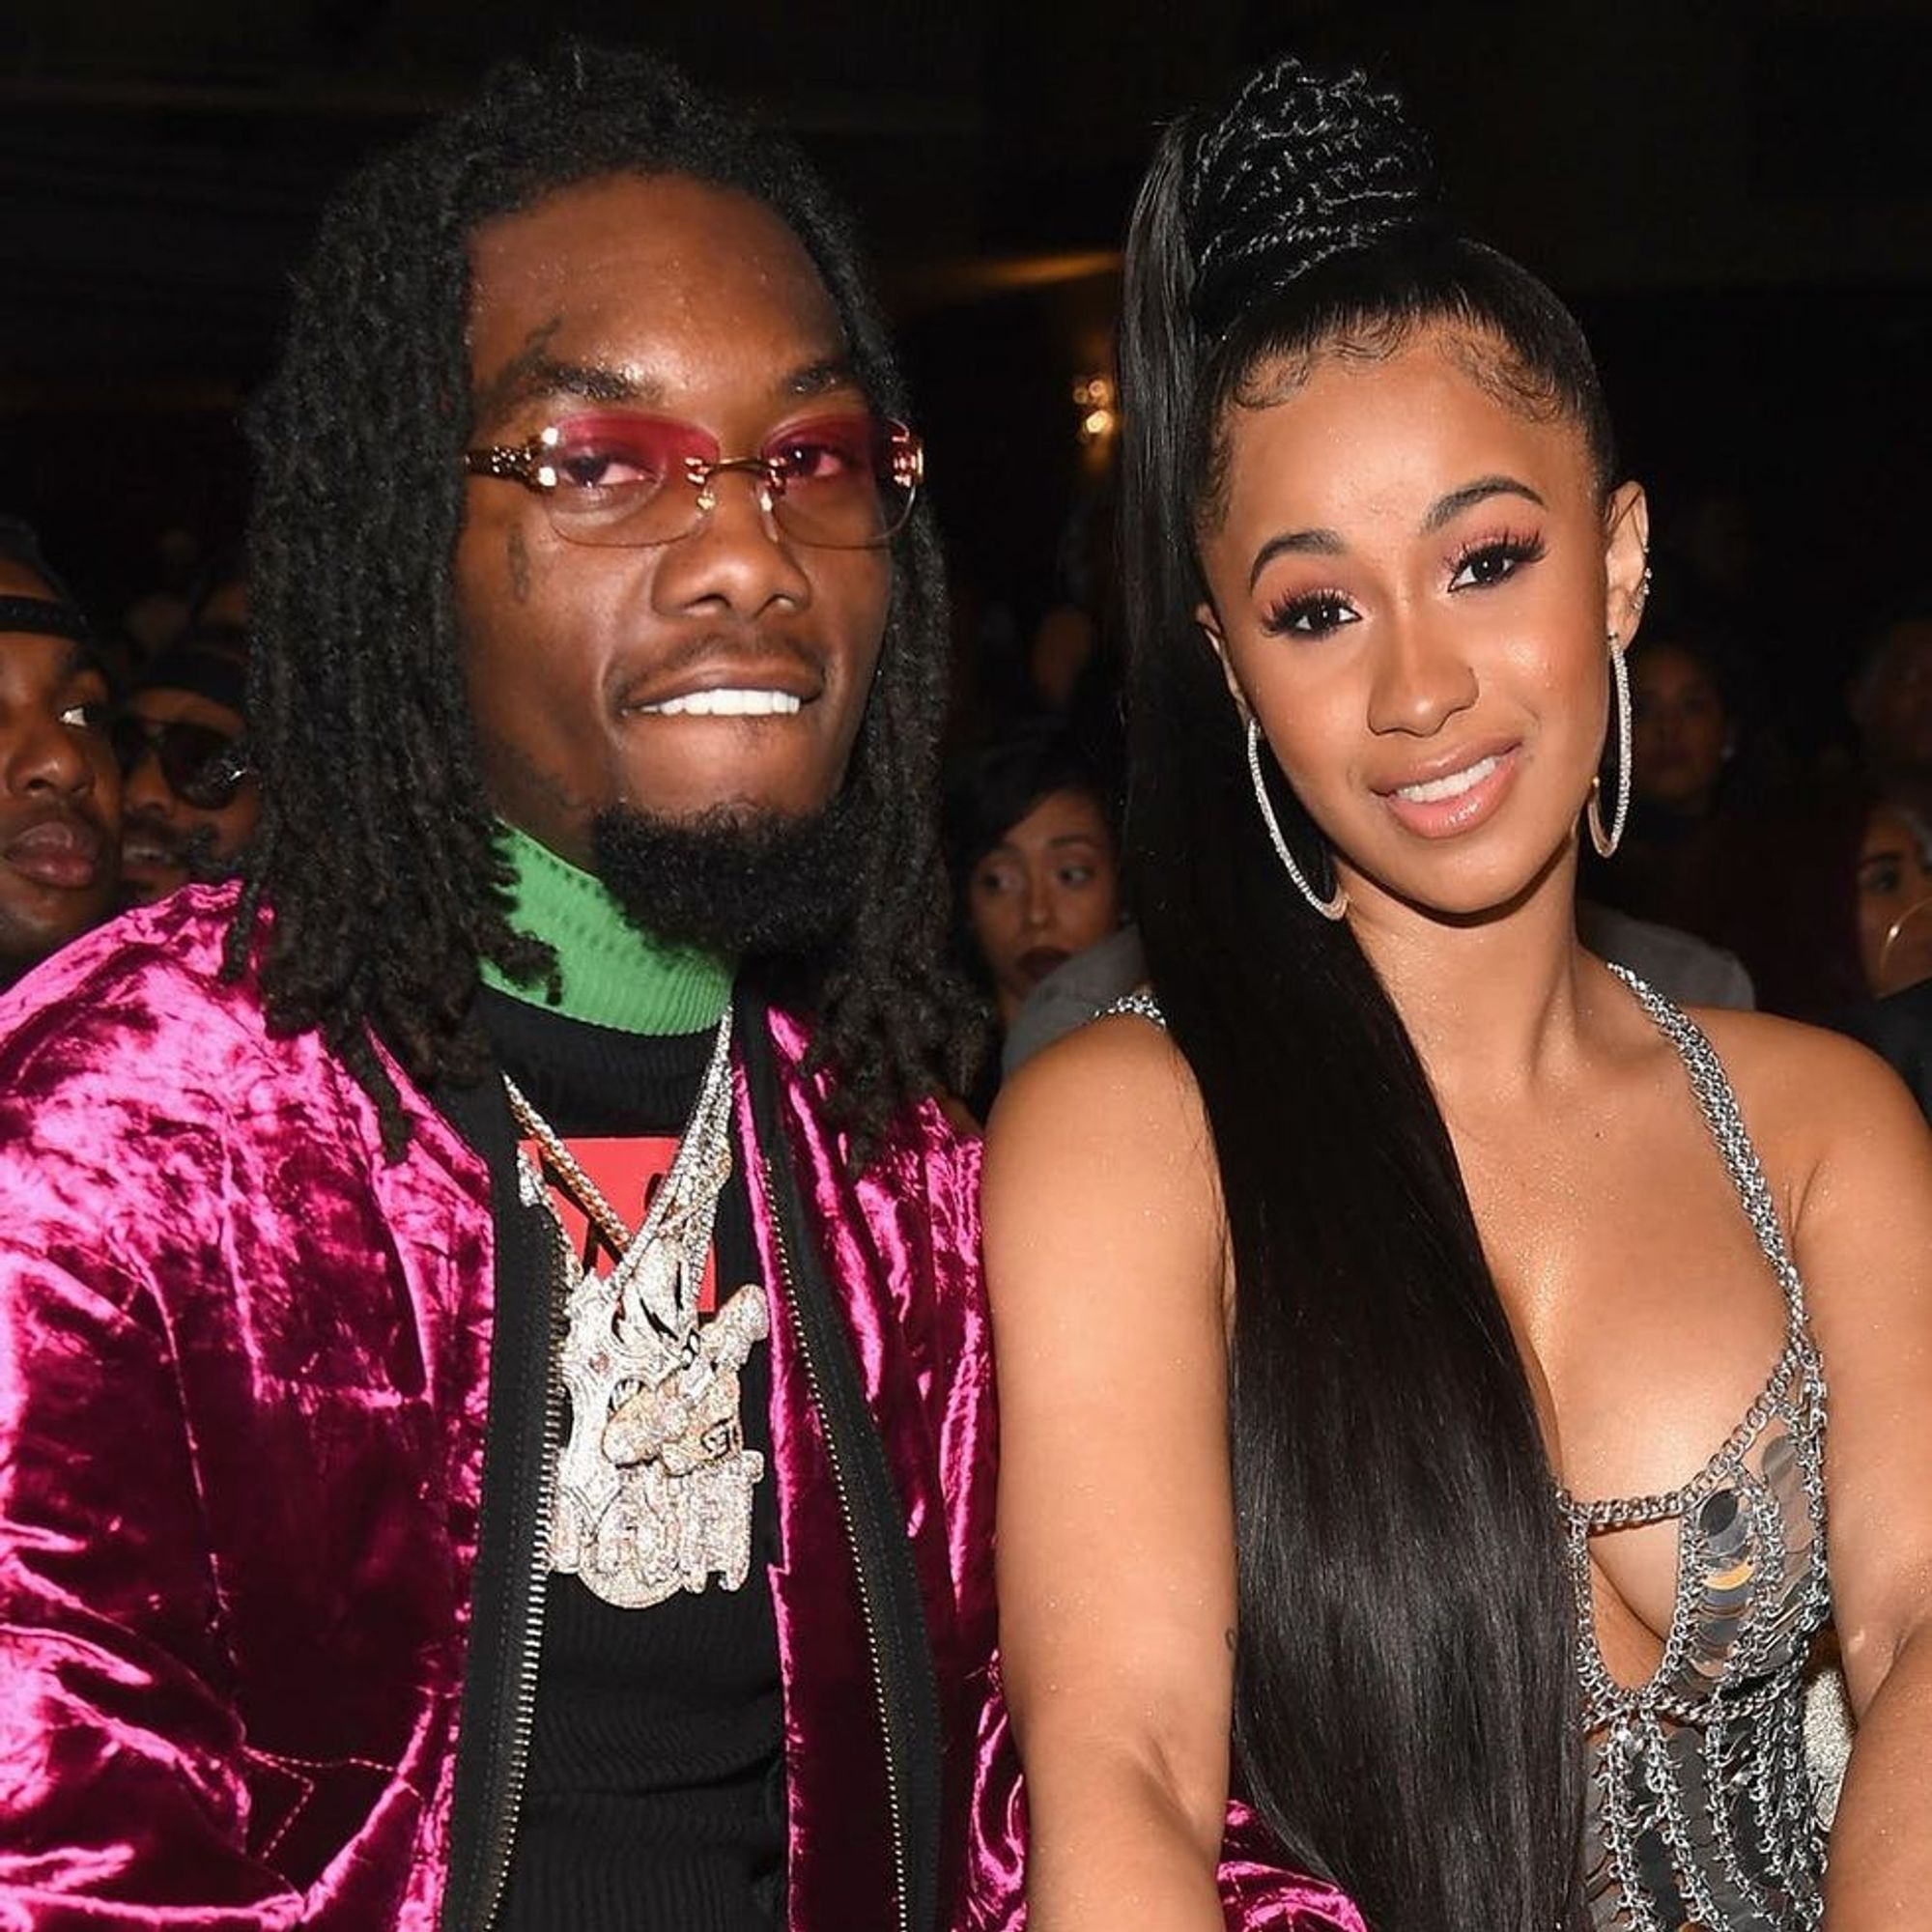 Rapper Cardi B and Offset of Migos Just Got Engaged Onstage! - Brit + Co